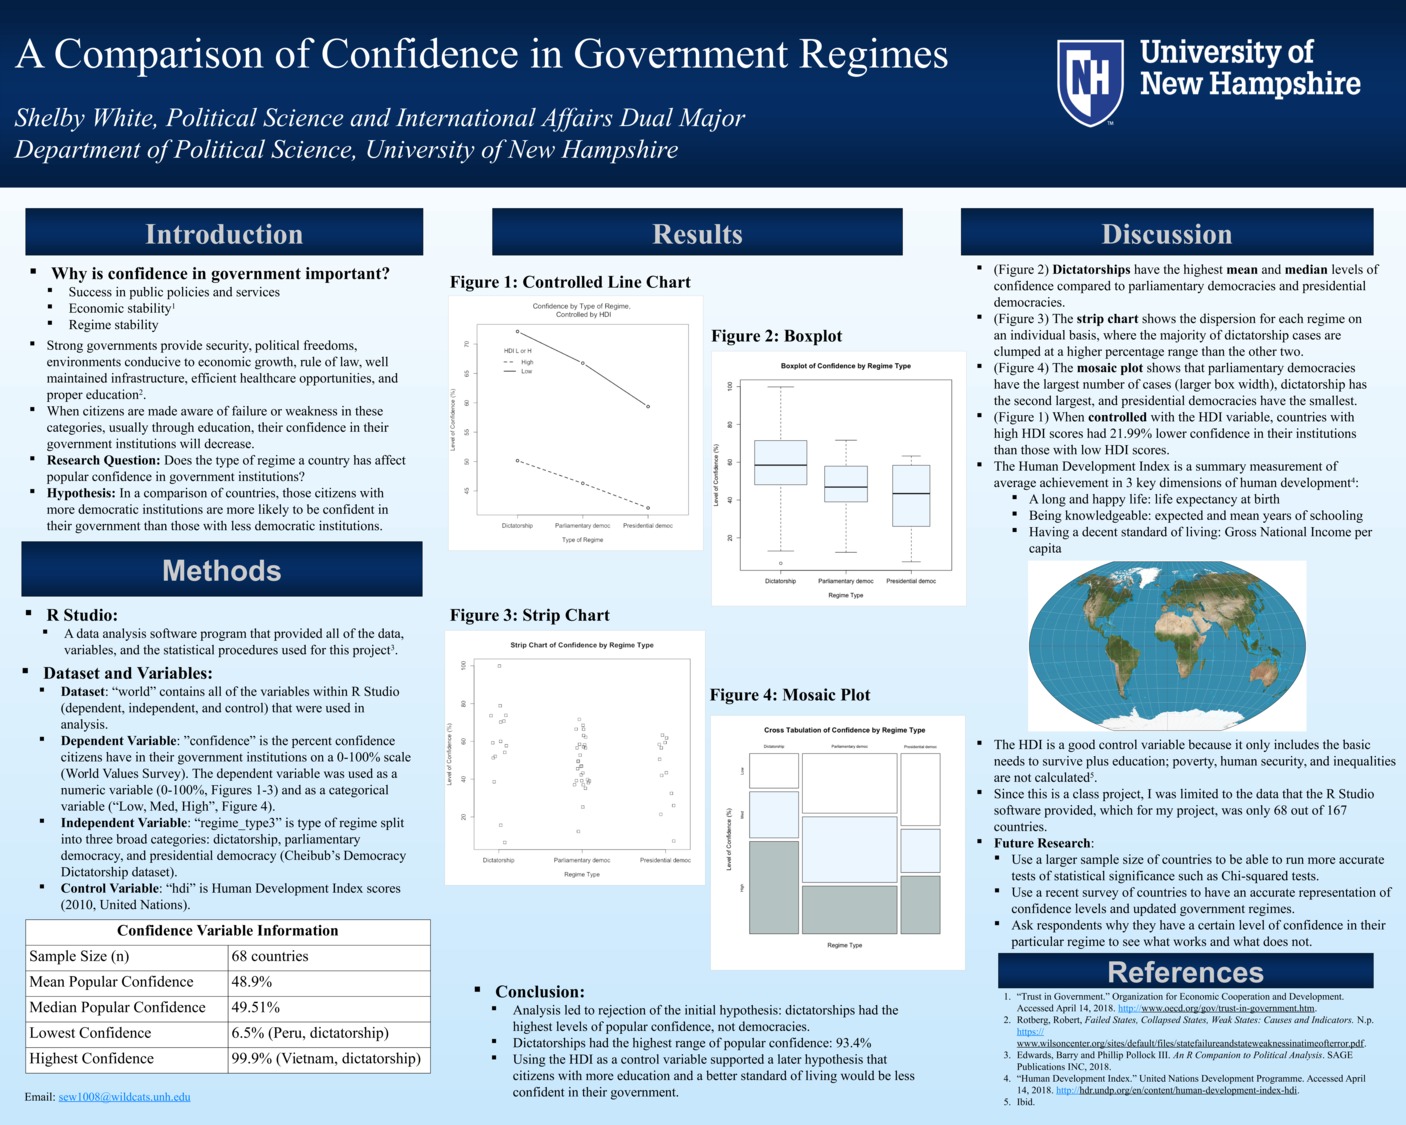 A Comparison Of Confidence In Government Regimes by sew1008